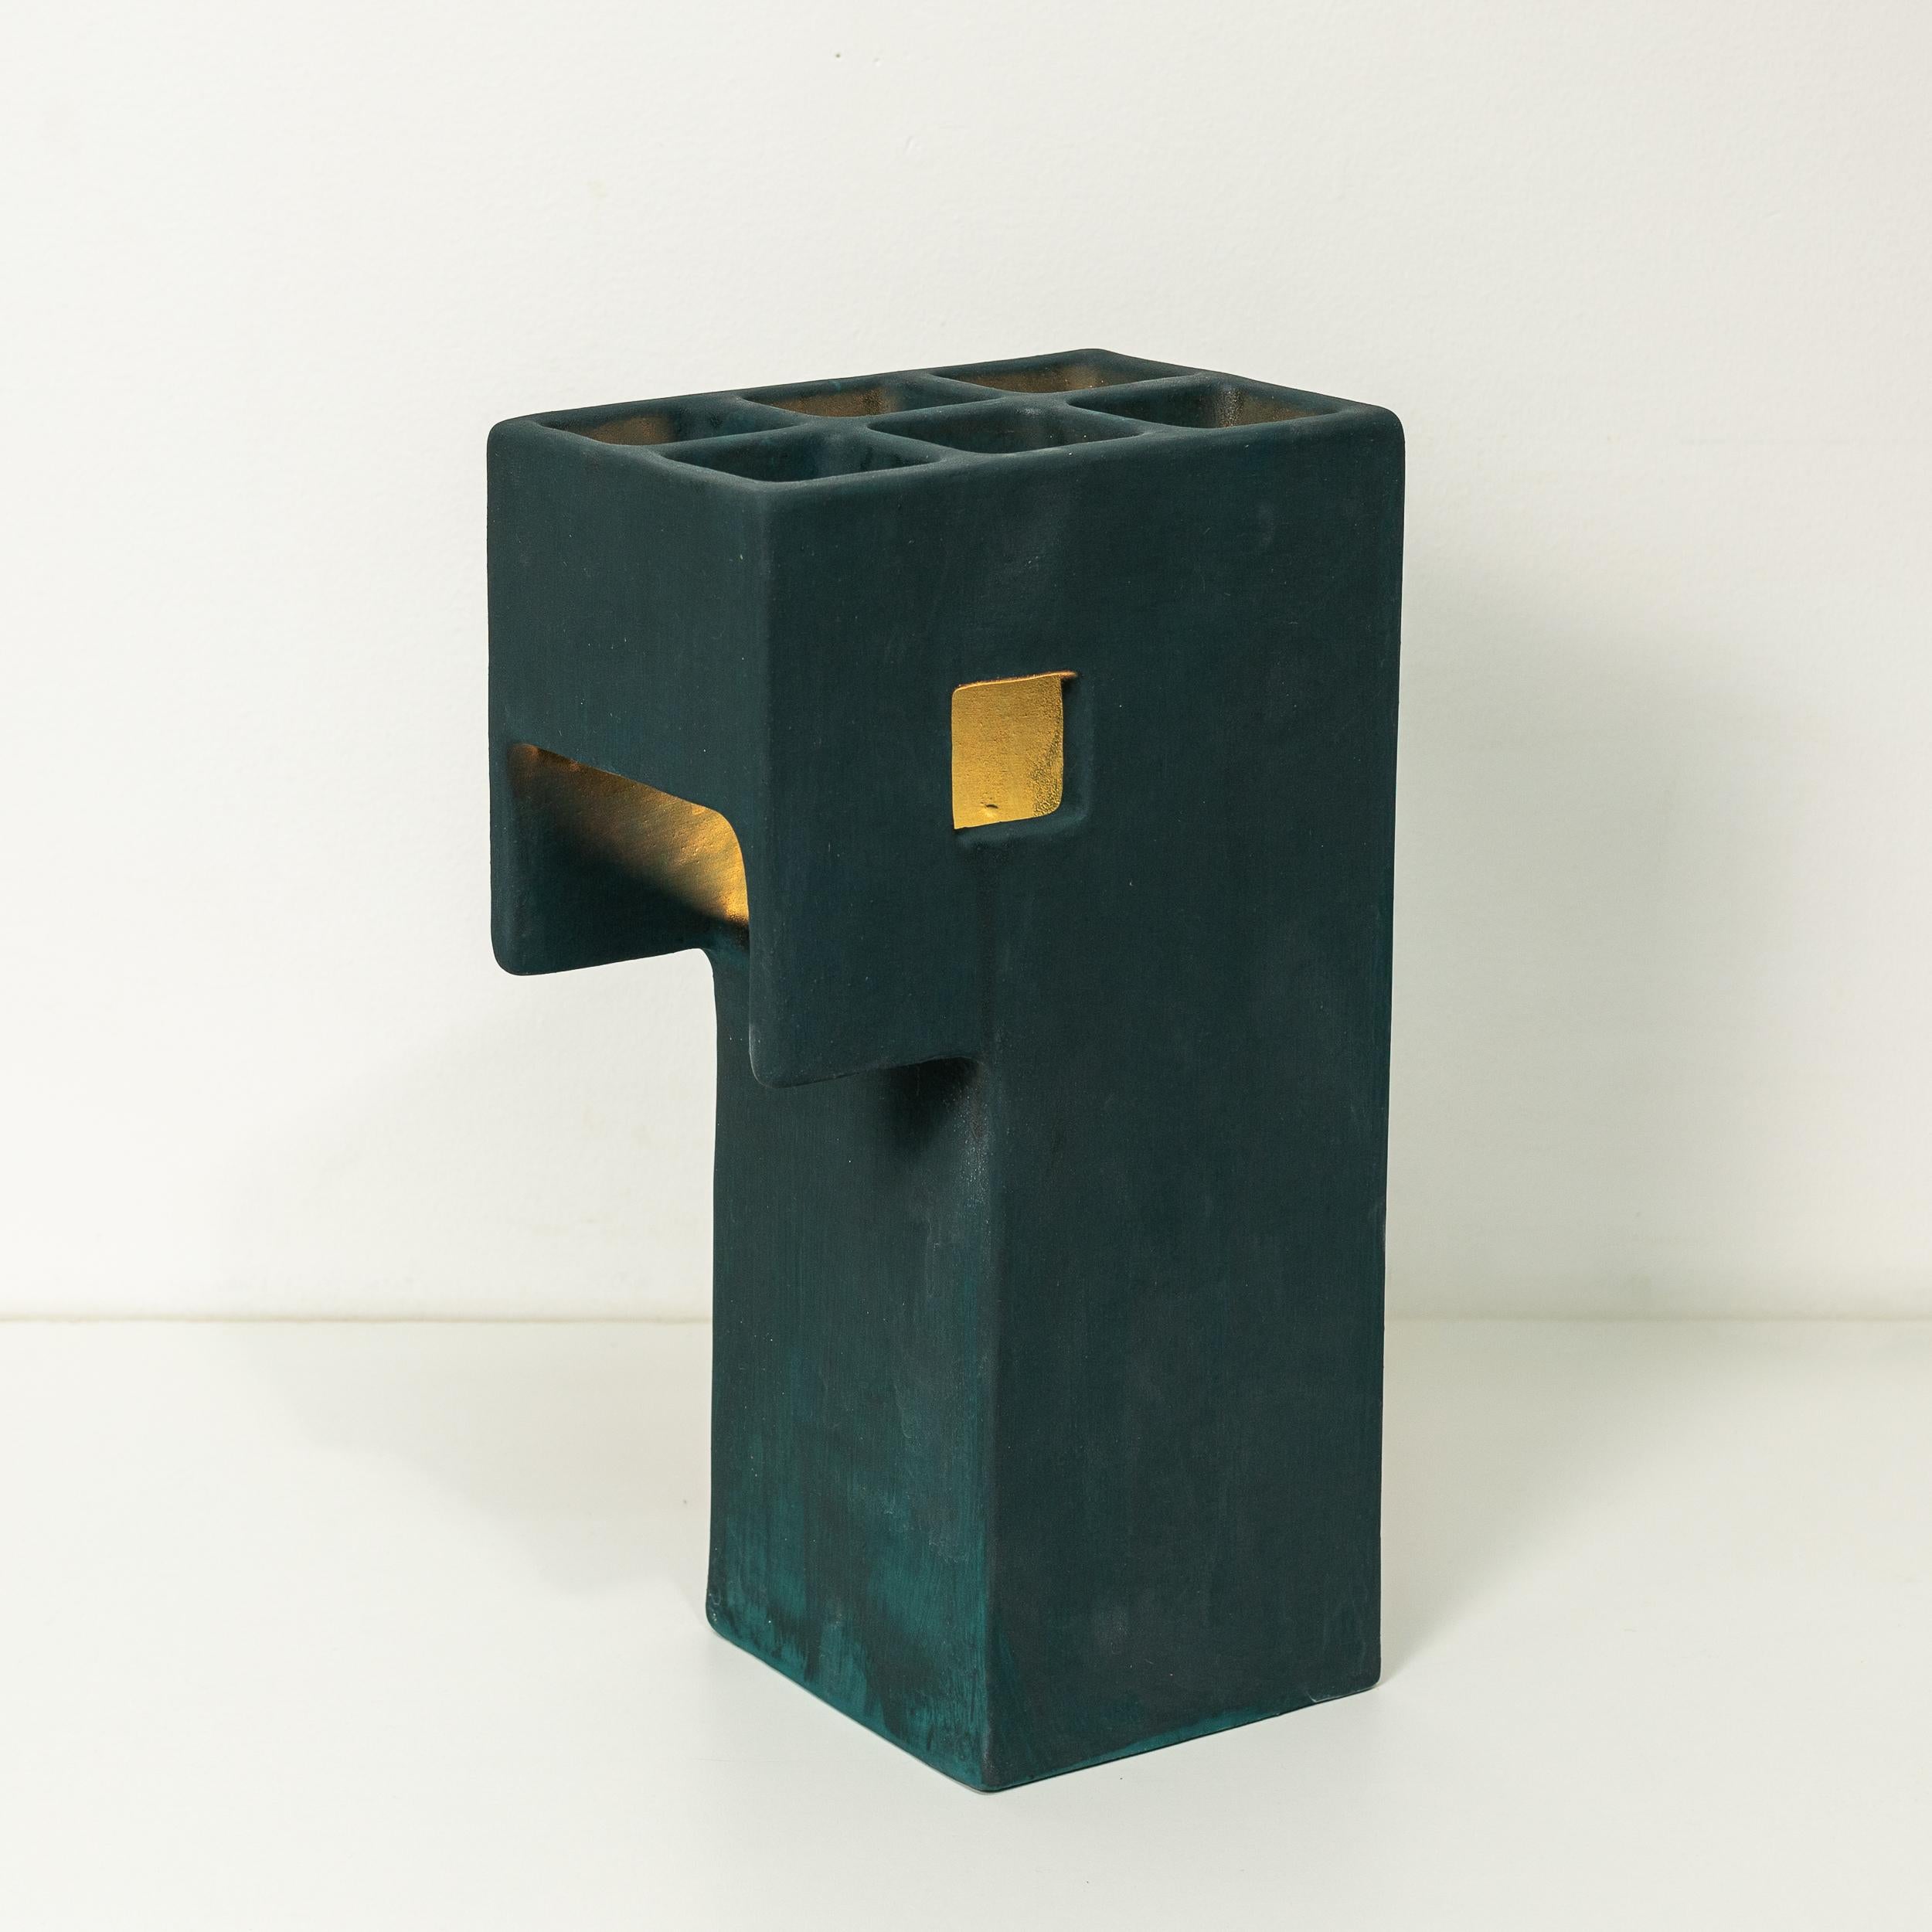 Ding Dong Table Lamp by Luft Tanaka, ceramic, dark green, brutalist, geometric In New Condition For Sale In Brooklyn, NY